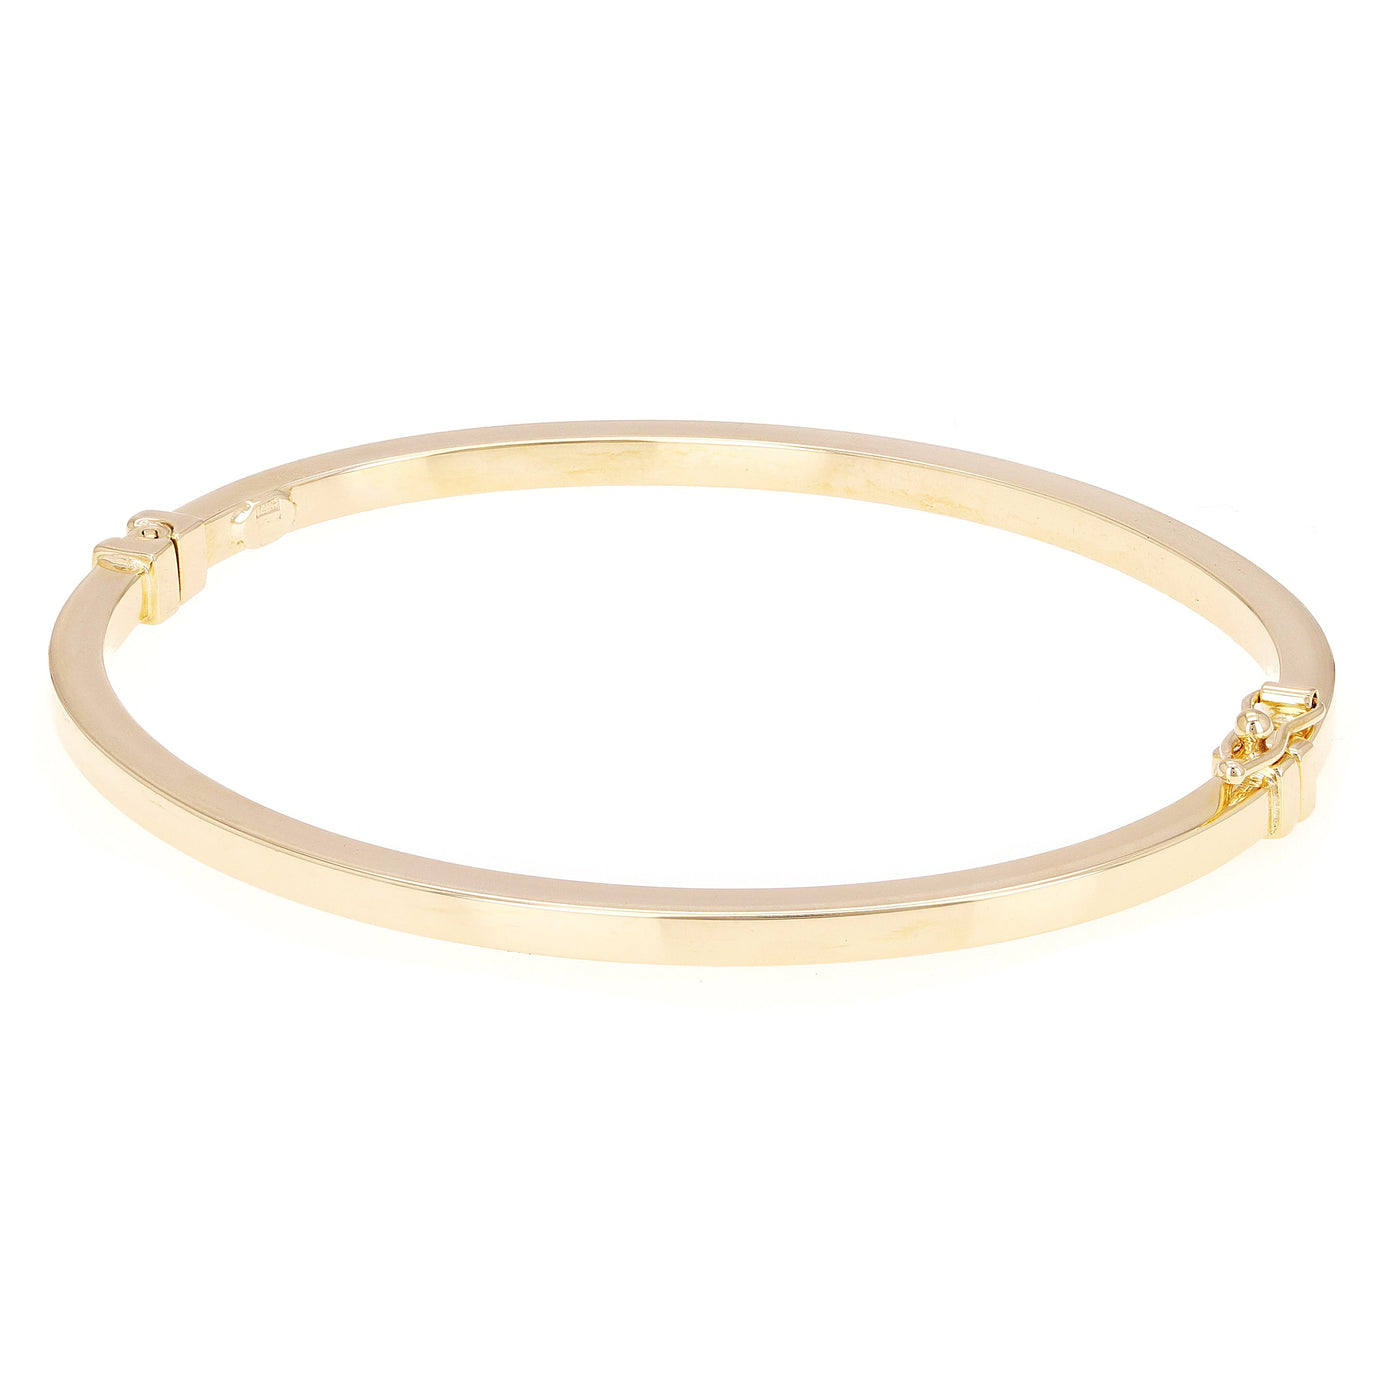 A beautiful, simple gold bangle bracelet from Direct Source Gold & Diamond.